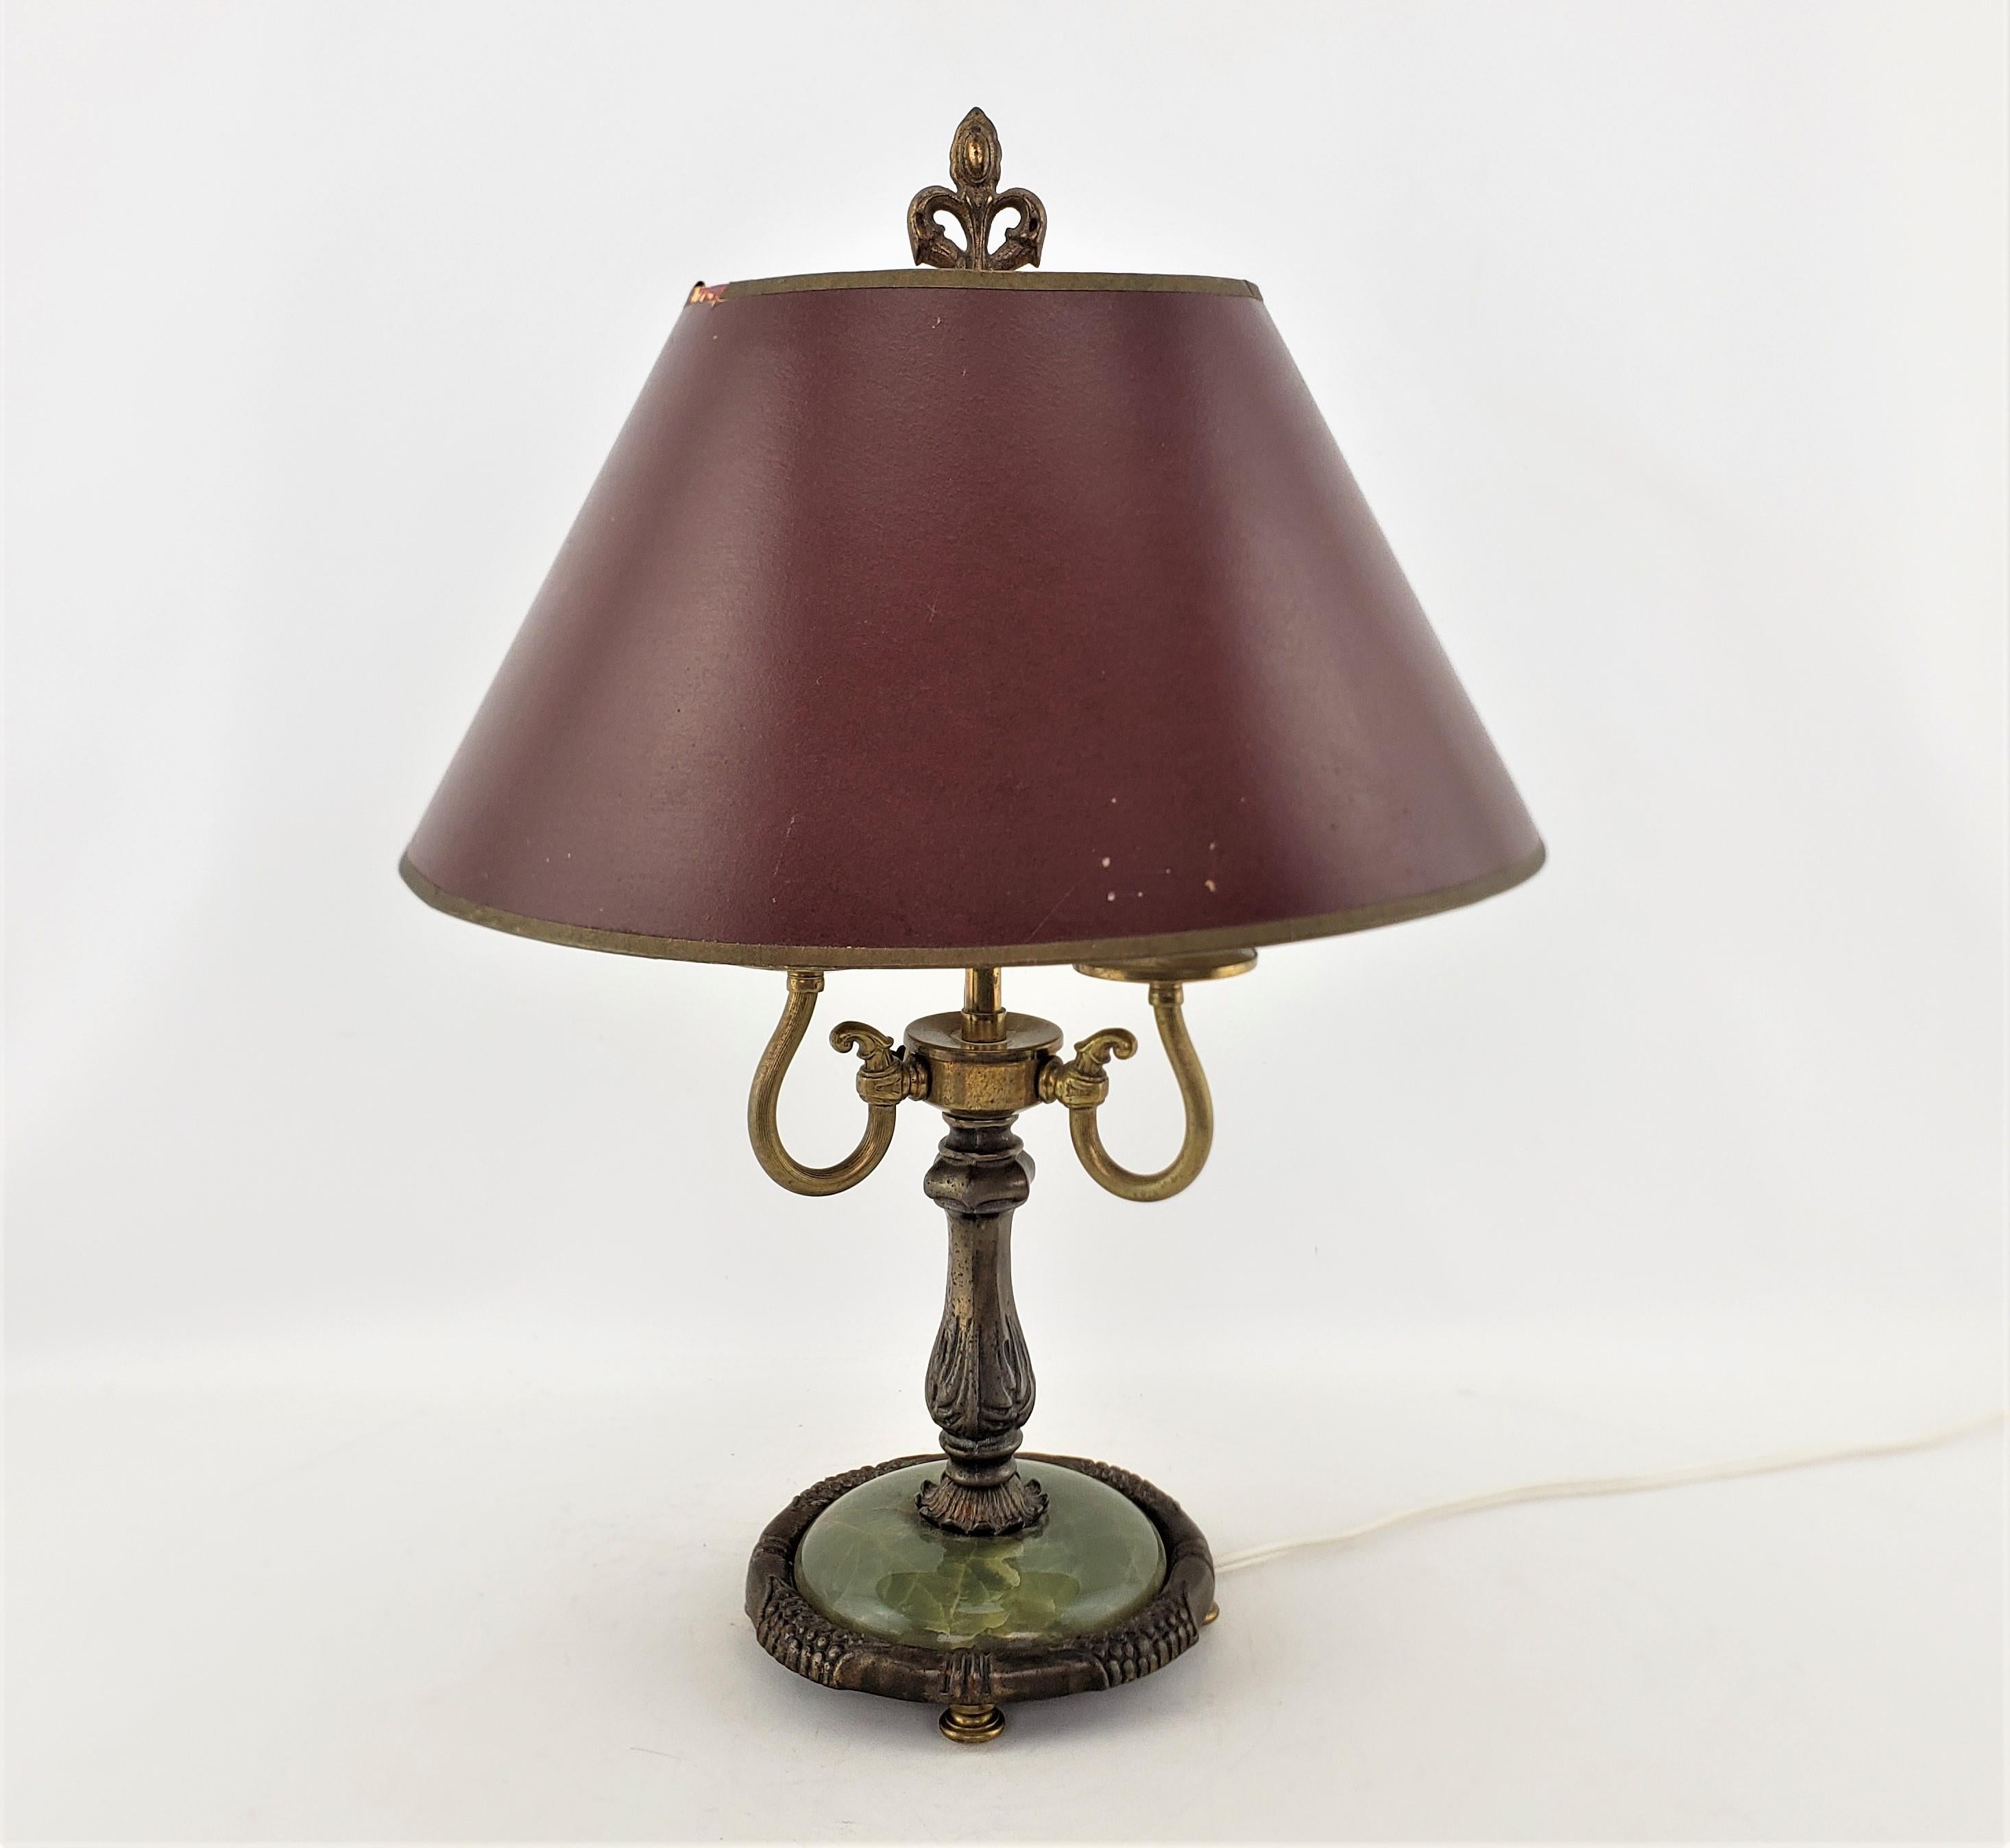 This antique bouilette style desk or table lamp is unsigned, but presumed to have originated from England and date to approximately 1920 and done in the French Empire revival style. The lamp is composed of cast brass with a fleur de lis stylized